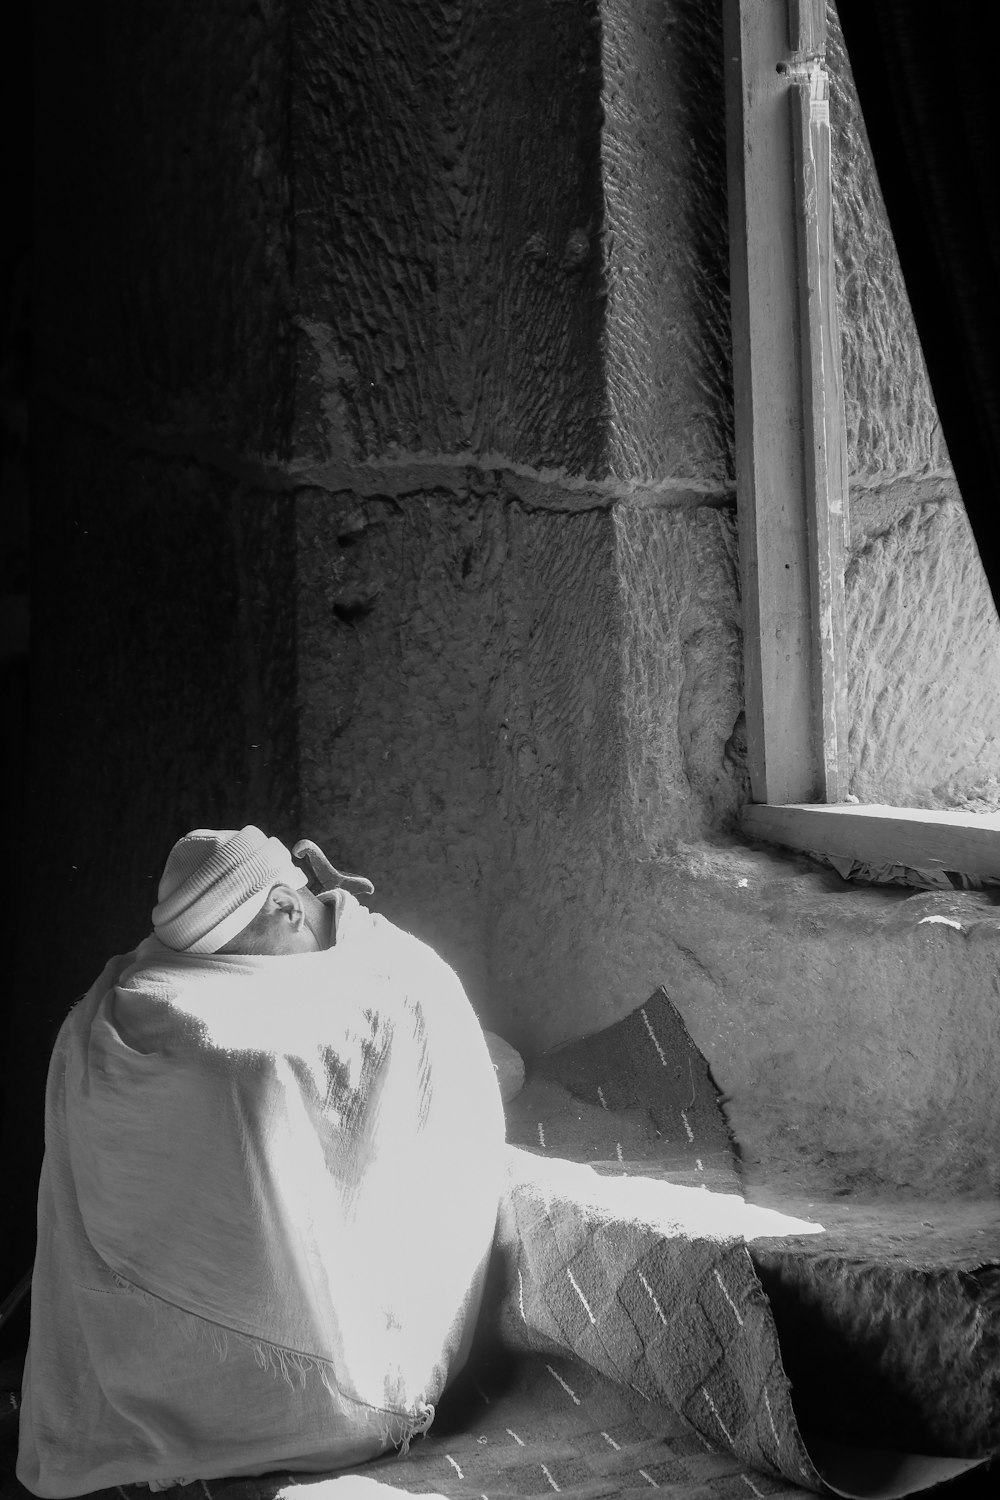 grayscale photography of man sitting while hiding face